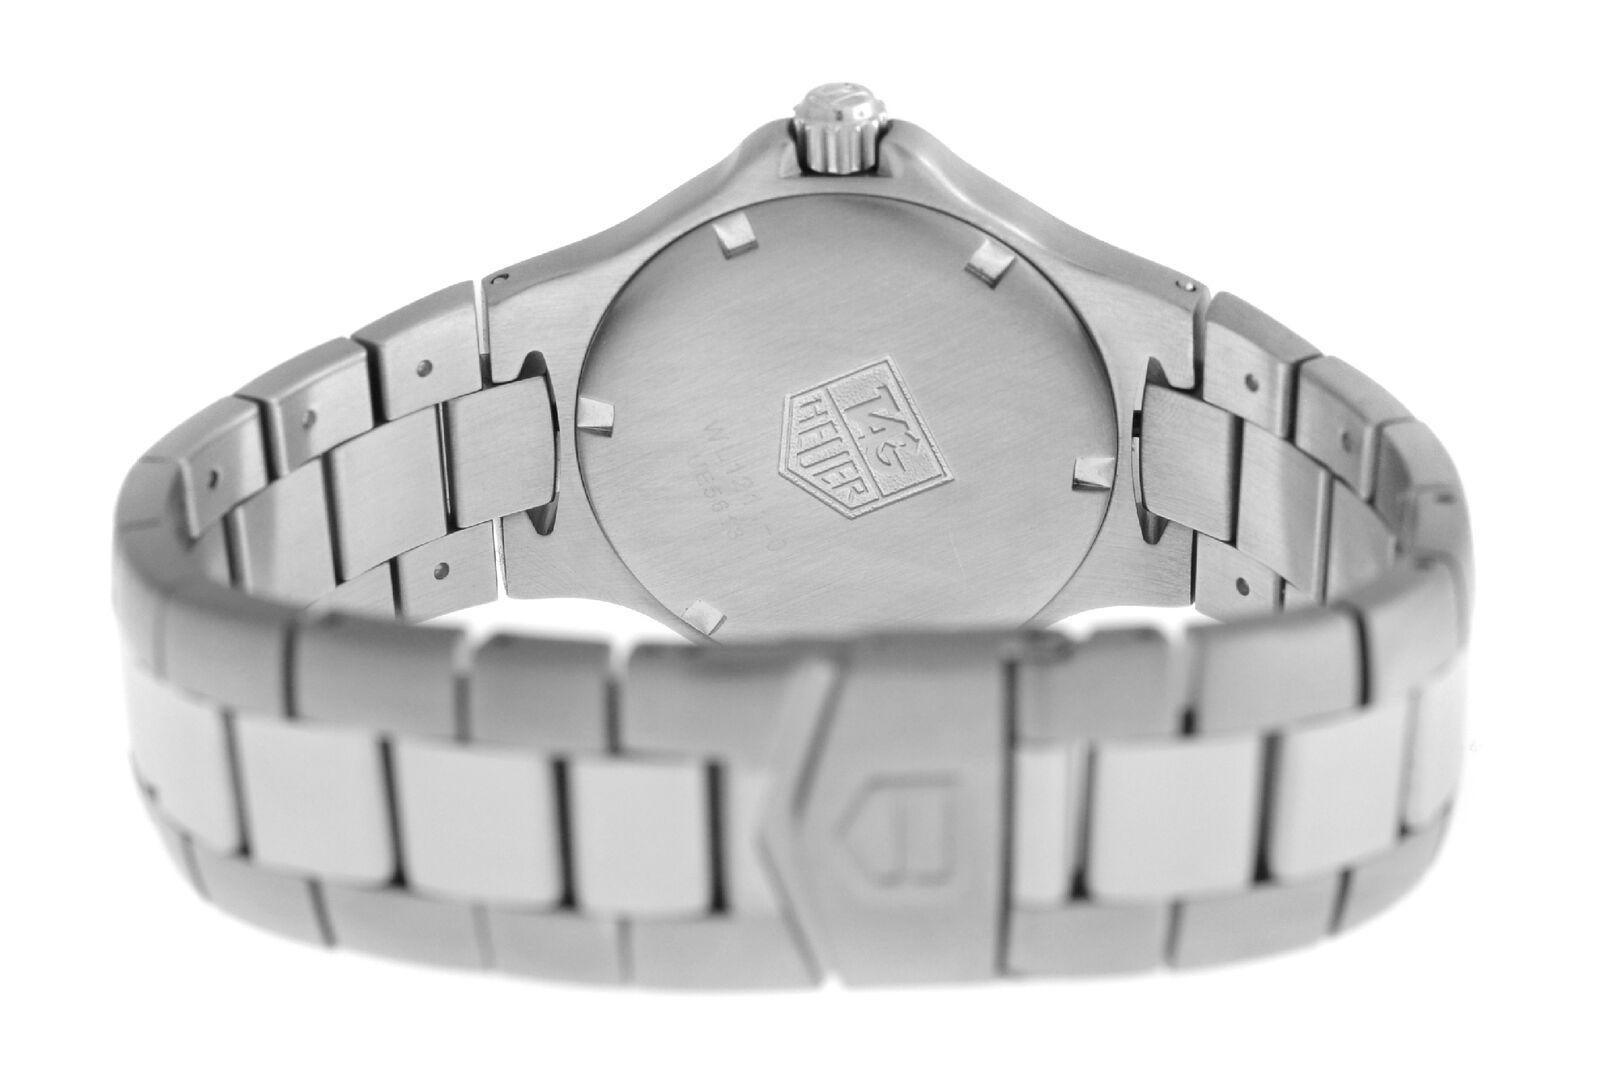 Unisex TAG Heuer Kirium WL1211-0 Stainless Steel Date 200M Quartz Watch In Excellent Condition For Sale In New York, NY